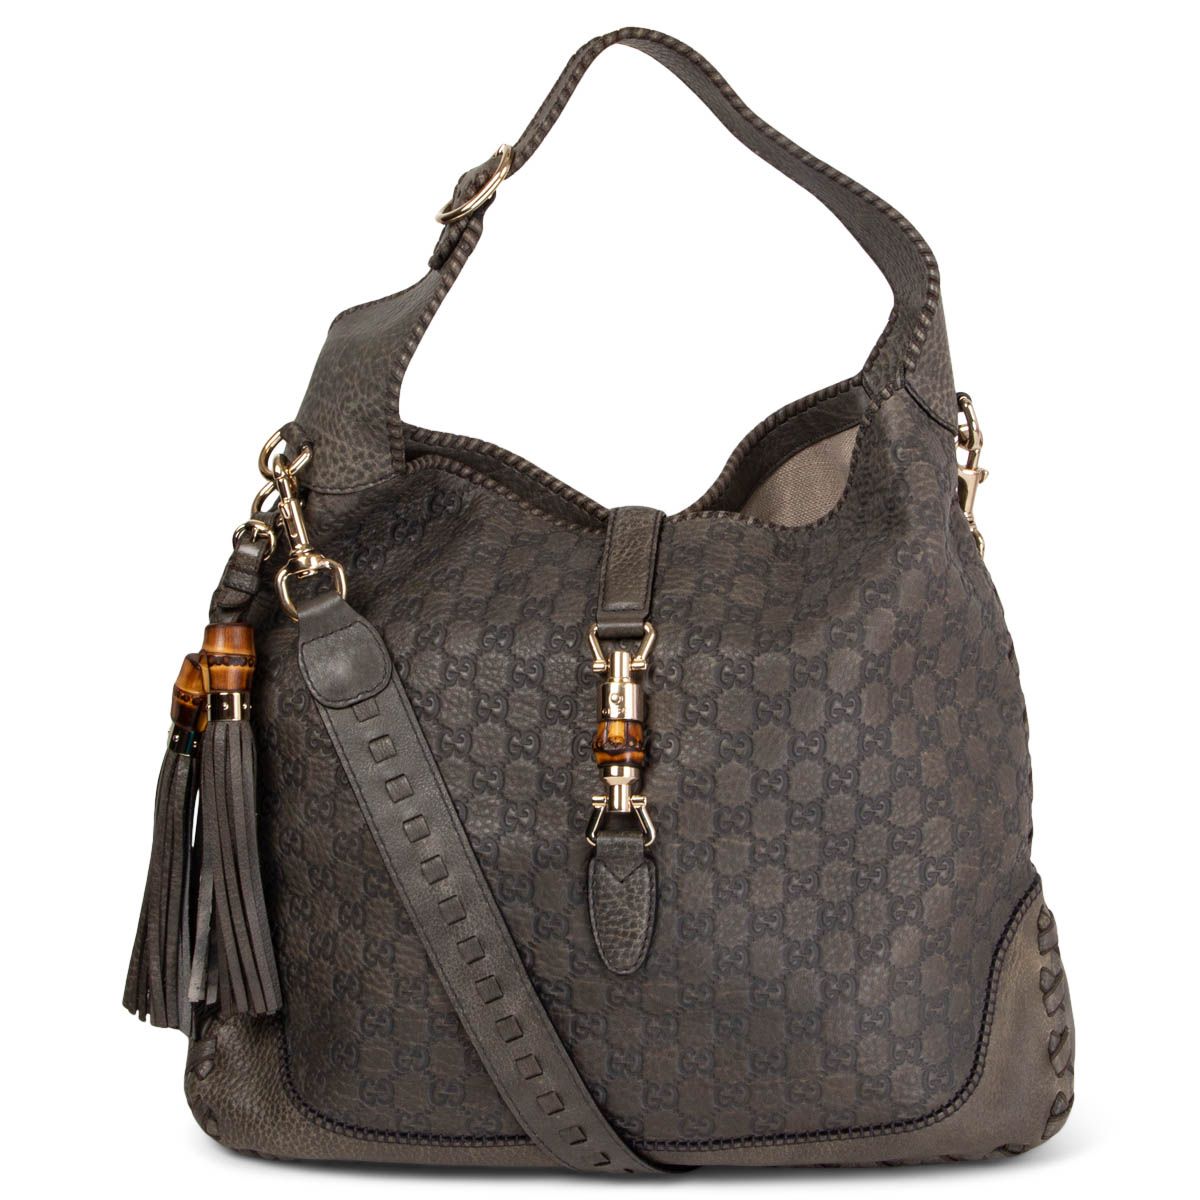 Gucci New Jackie Large Hobo Shoulder Bag Grey Guccissima Leather